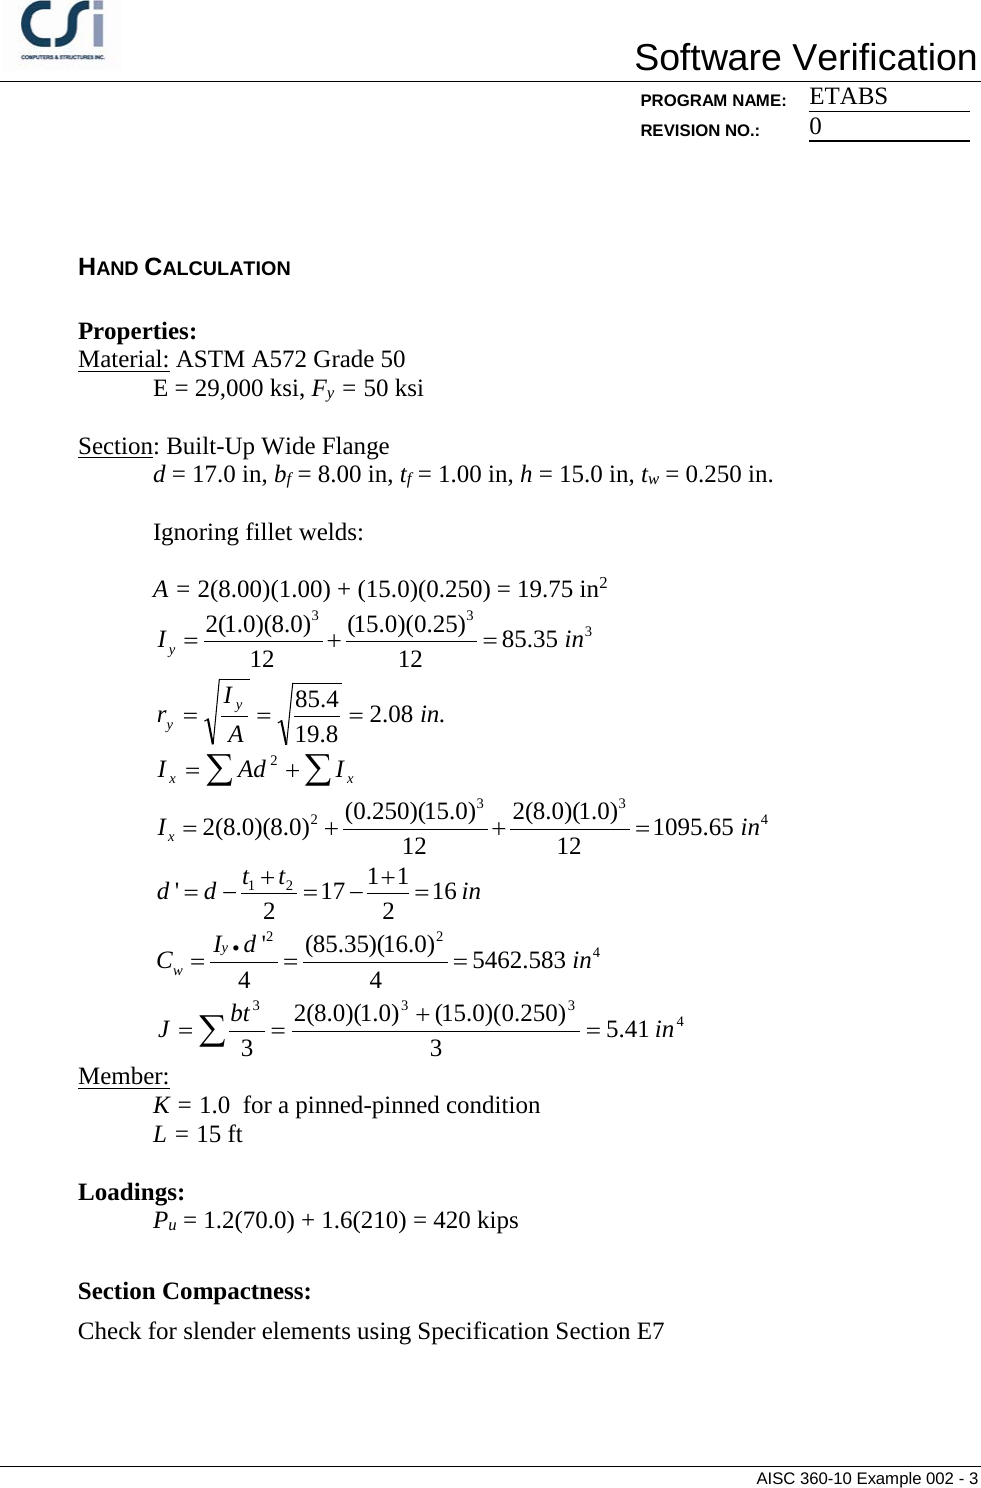 Page 3 of 6 - Contents AISC 360-10 Example 002